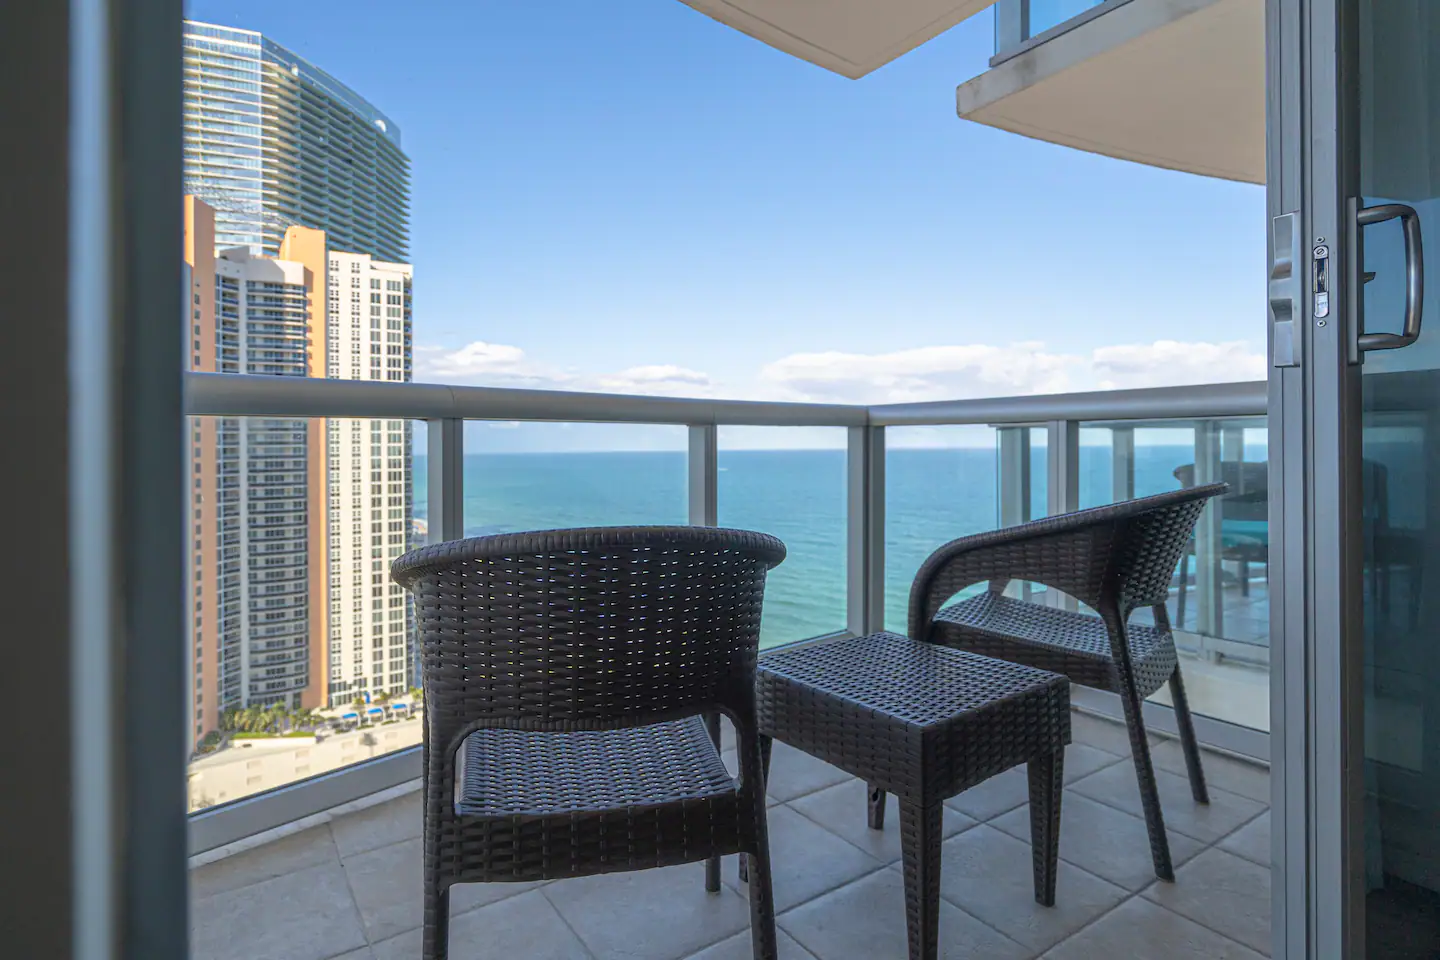 Relax on your balcony facing both the beach and the bay!
